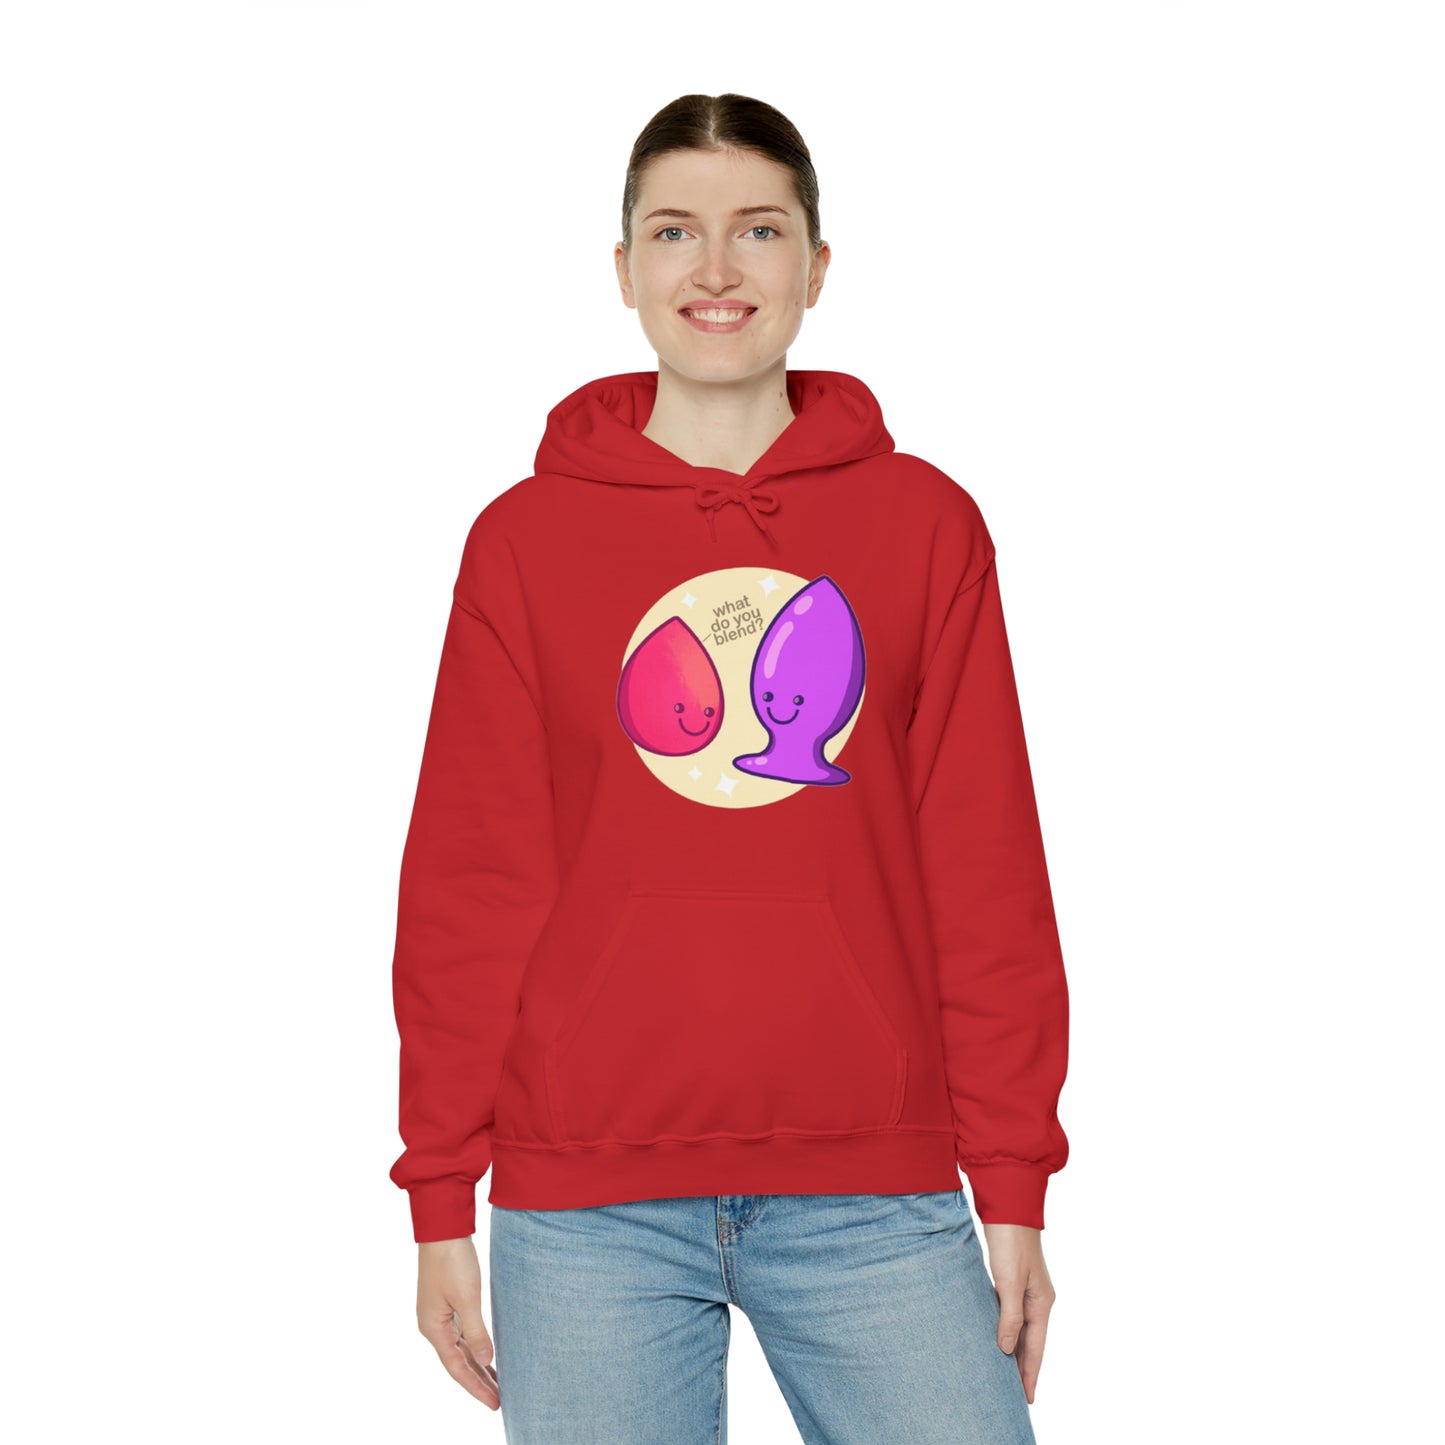 What Do You Blend? Unisex Hooded Sweatshirt